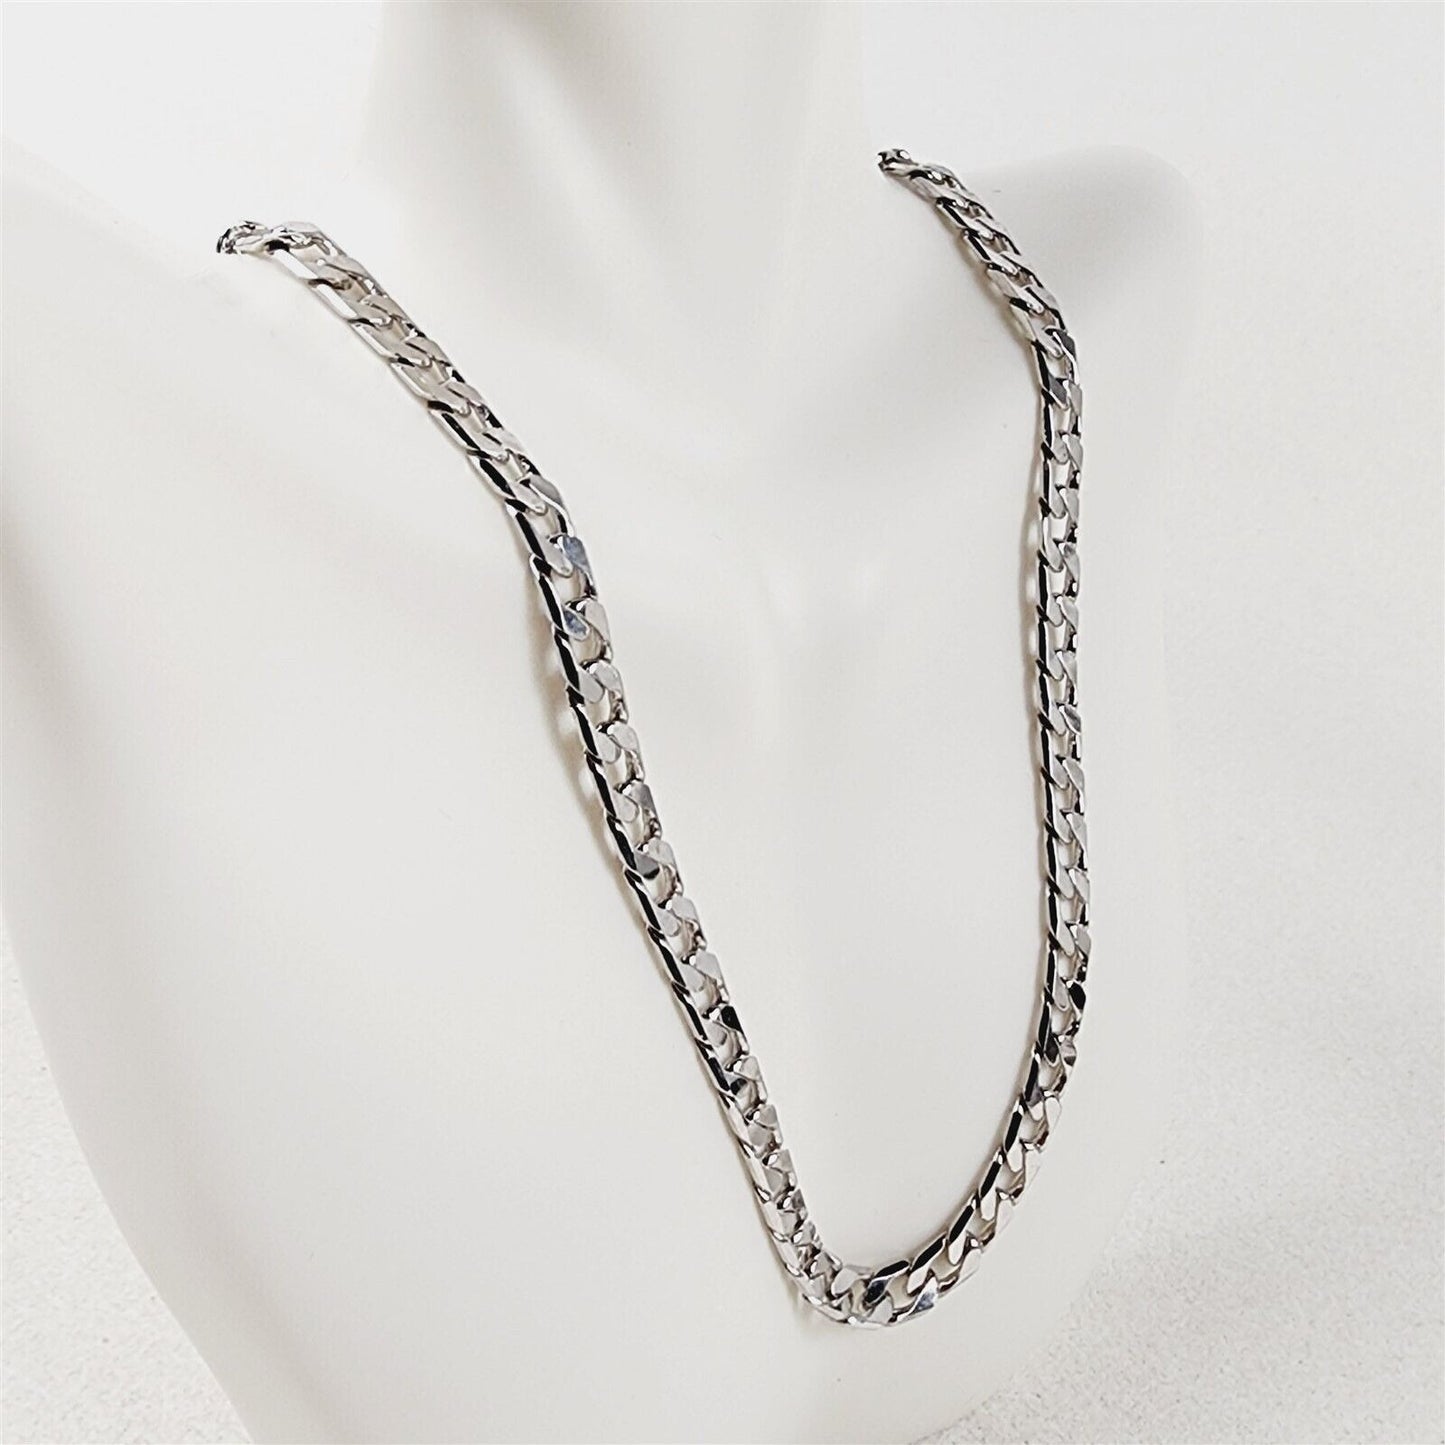 Rhodium Plated Necklace Bevelled Italian Link Chain - 18"